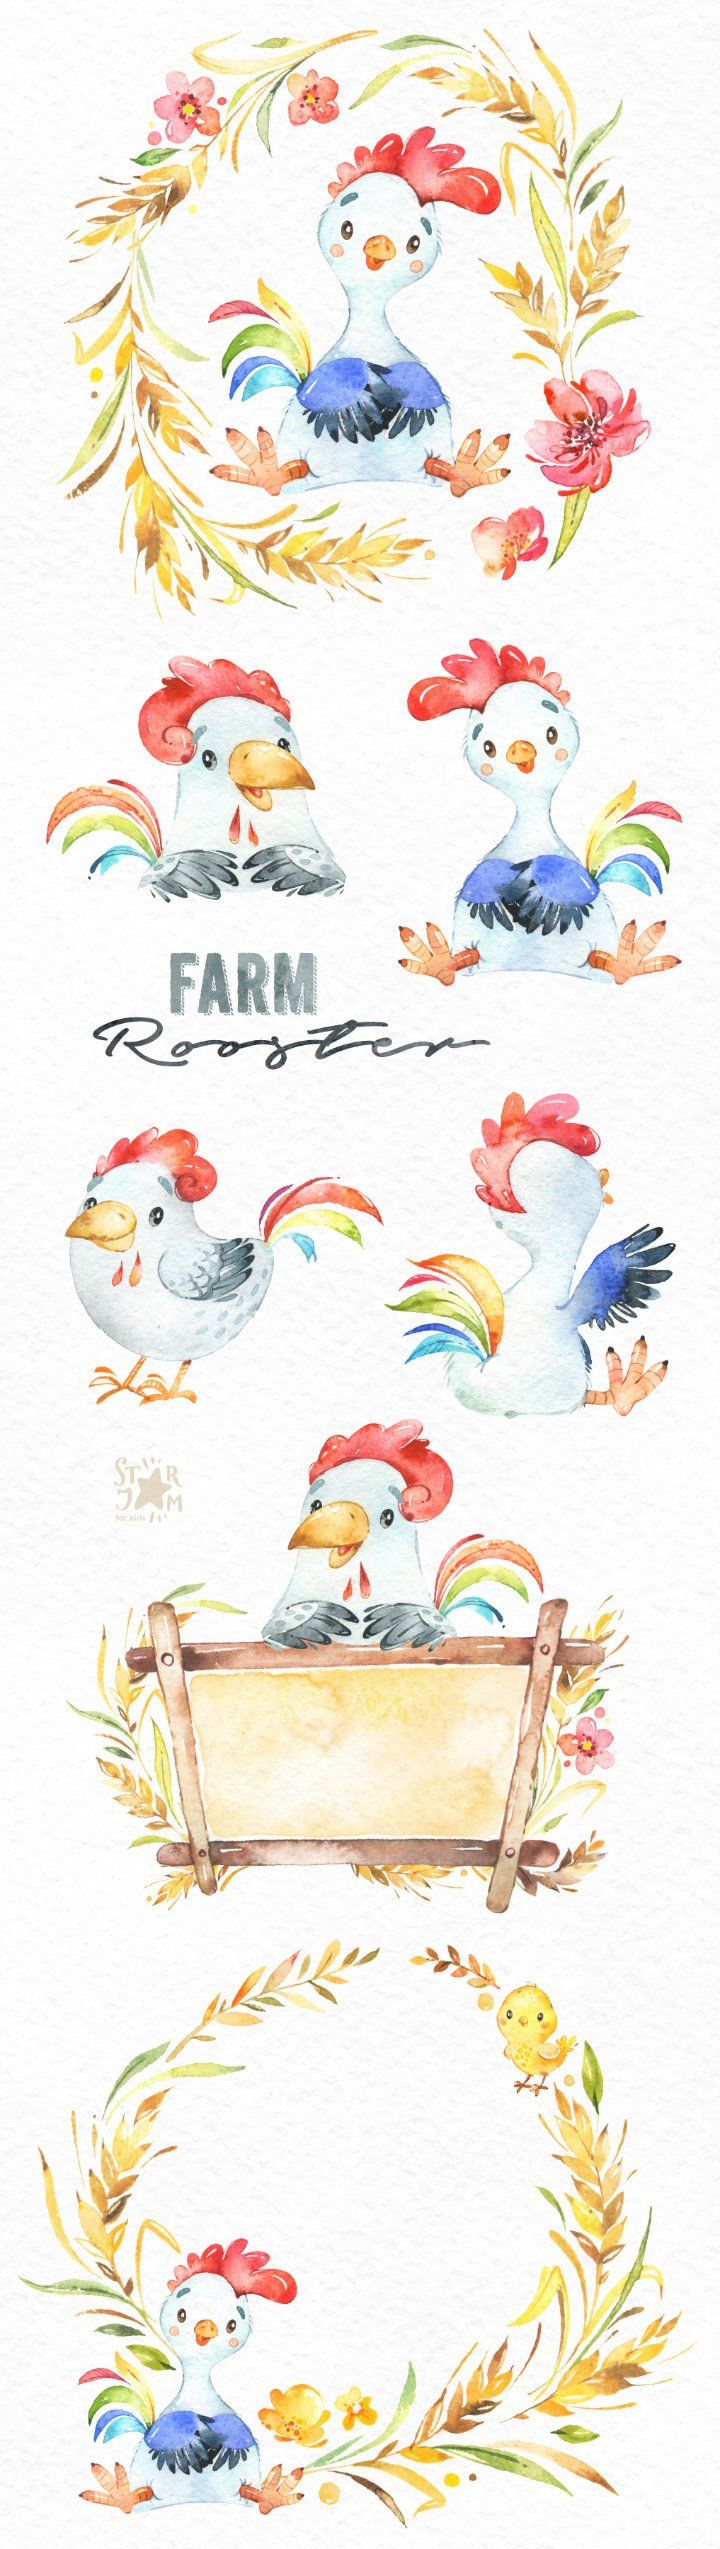 Farm rooster watercolor.